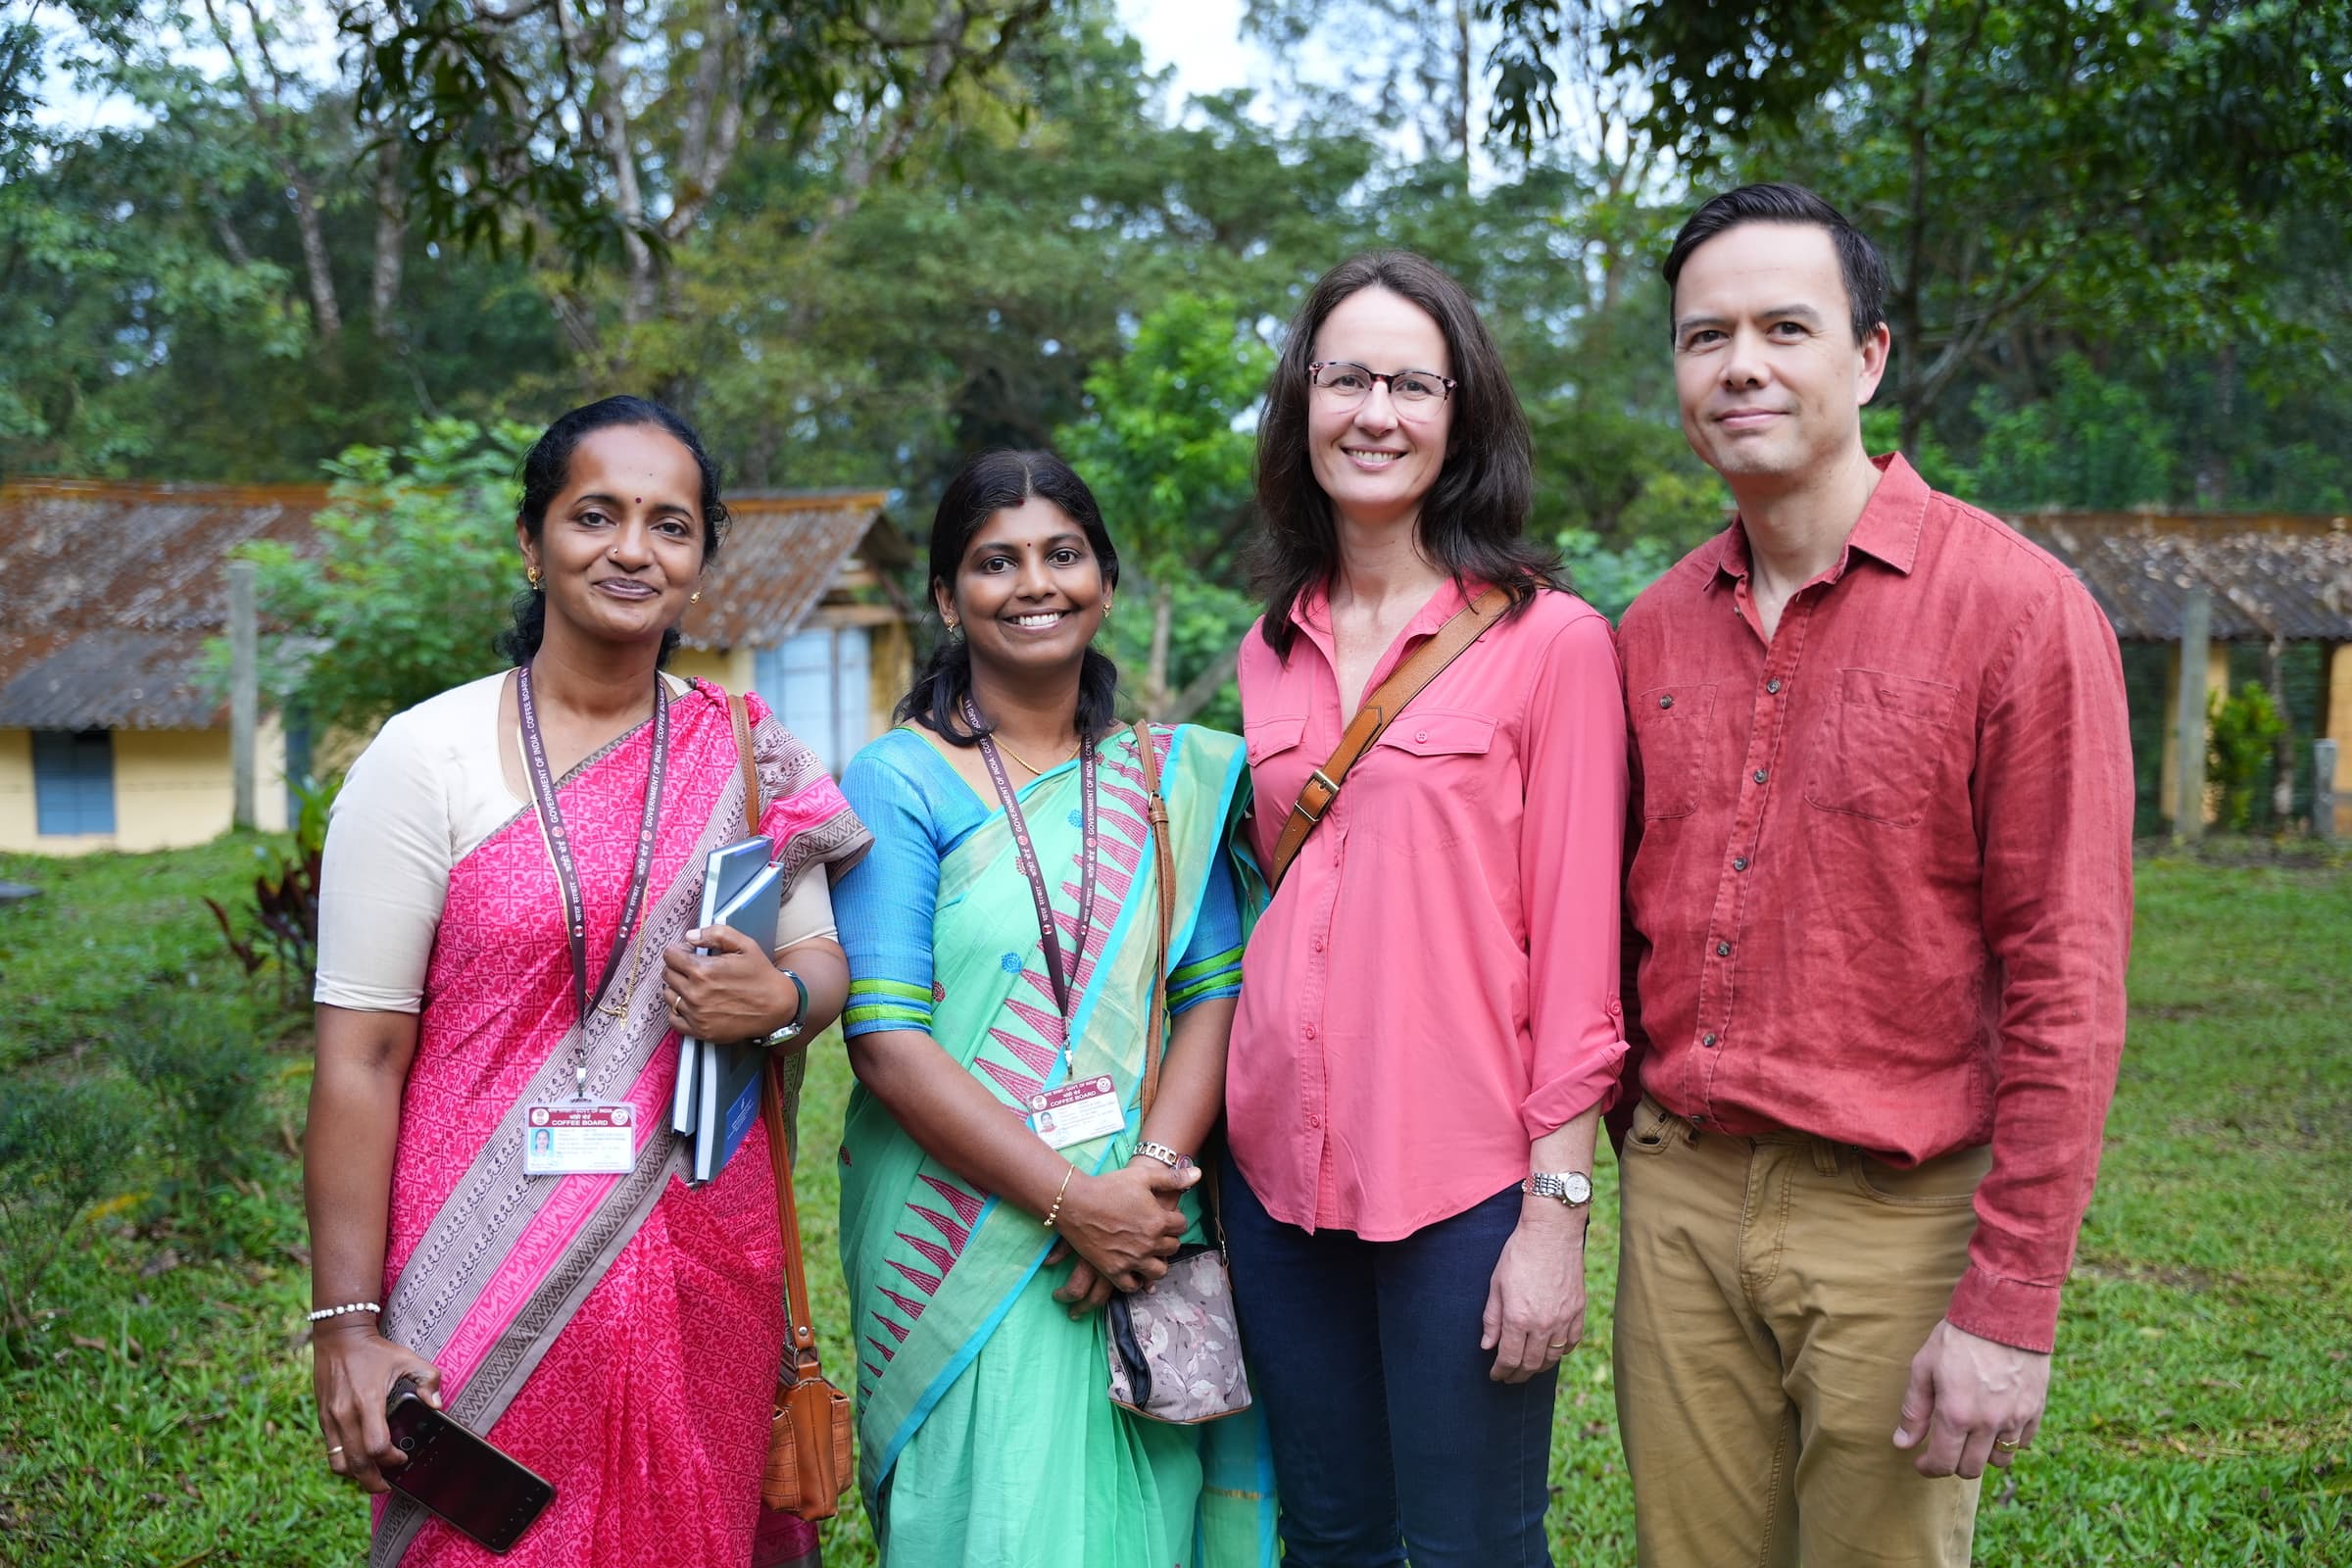 From L to R: Dr. Jeena Devasia, Divisional Head of Plant Physiology at CCRI, Dr. Divya K. Das, Research Assistant at CCRI, Dr. Tania Humphrey, and Dr. Kraig Kraft.